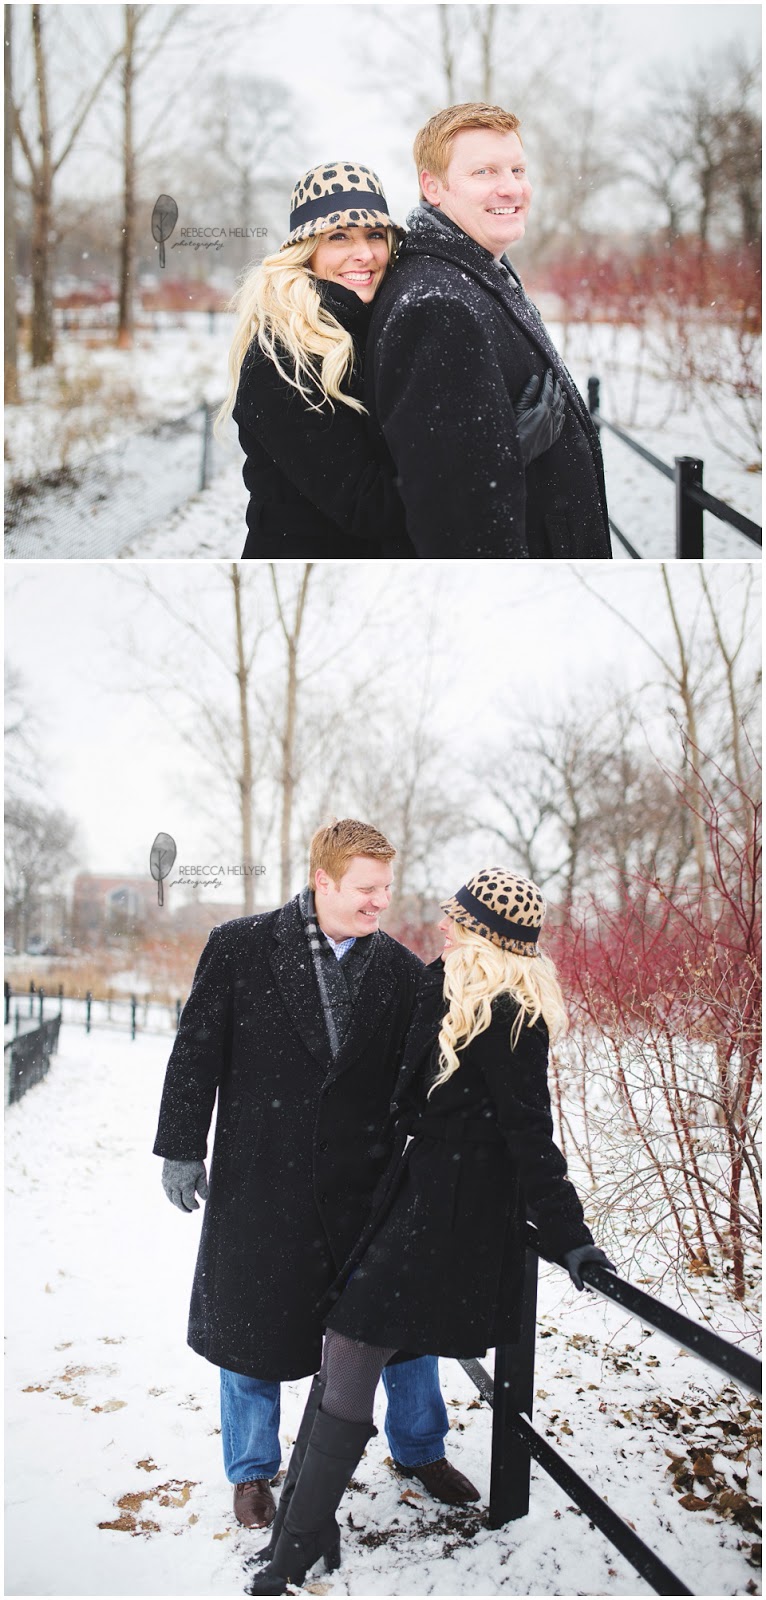 Chicago Couples Photographer | Rebecca Hellyer Photography